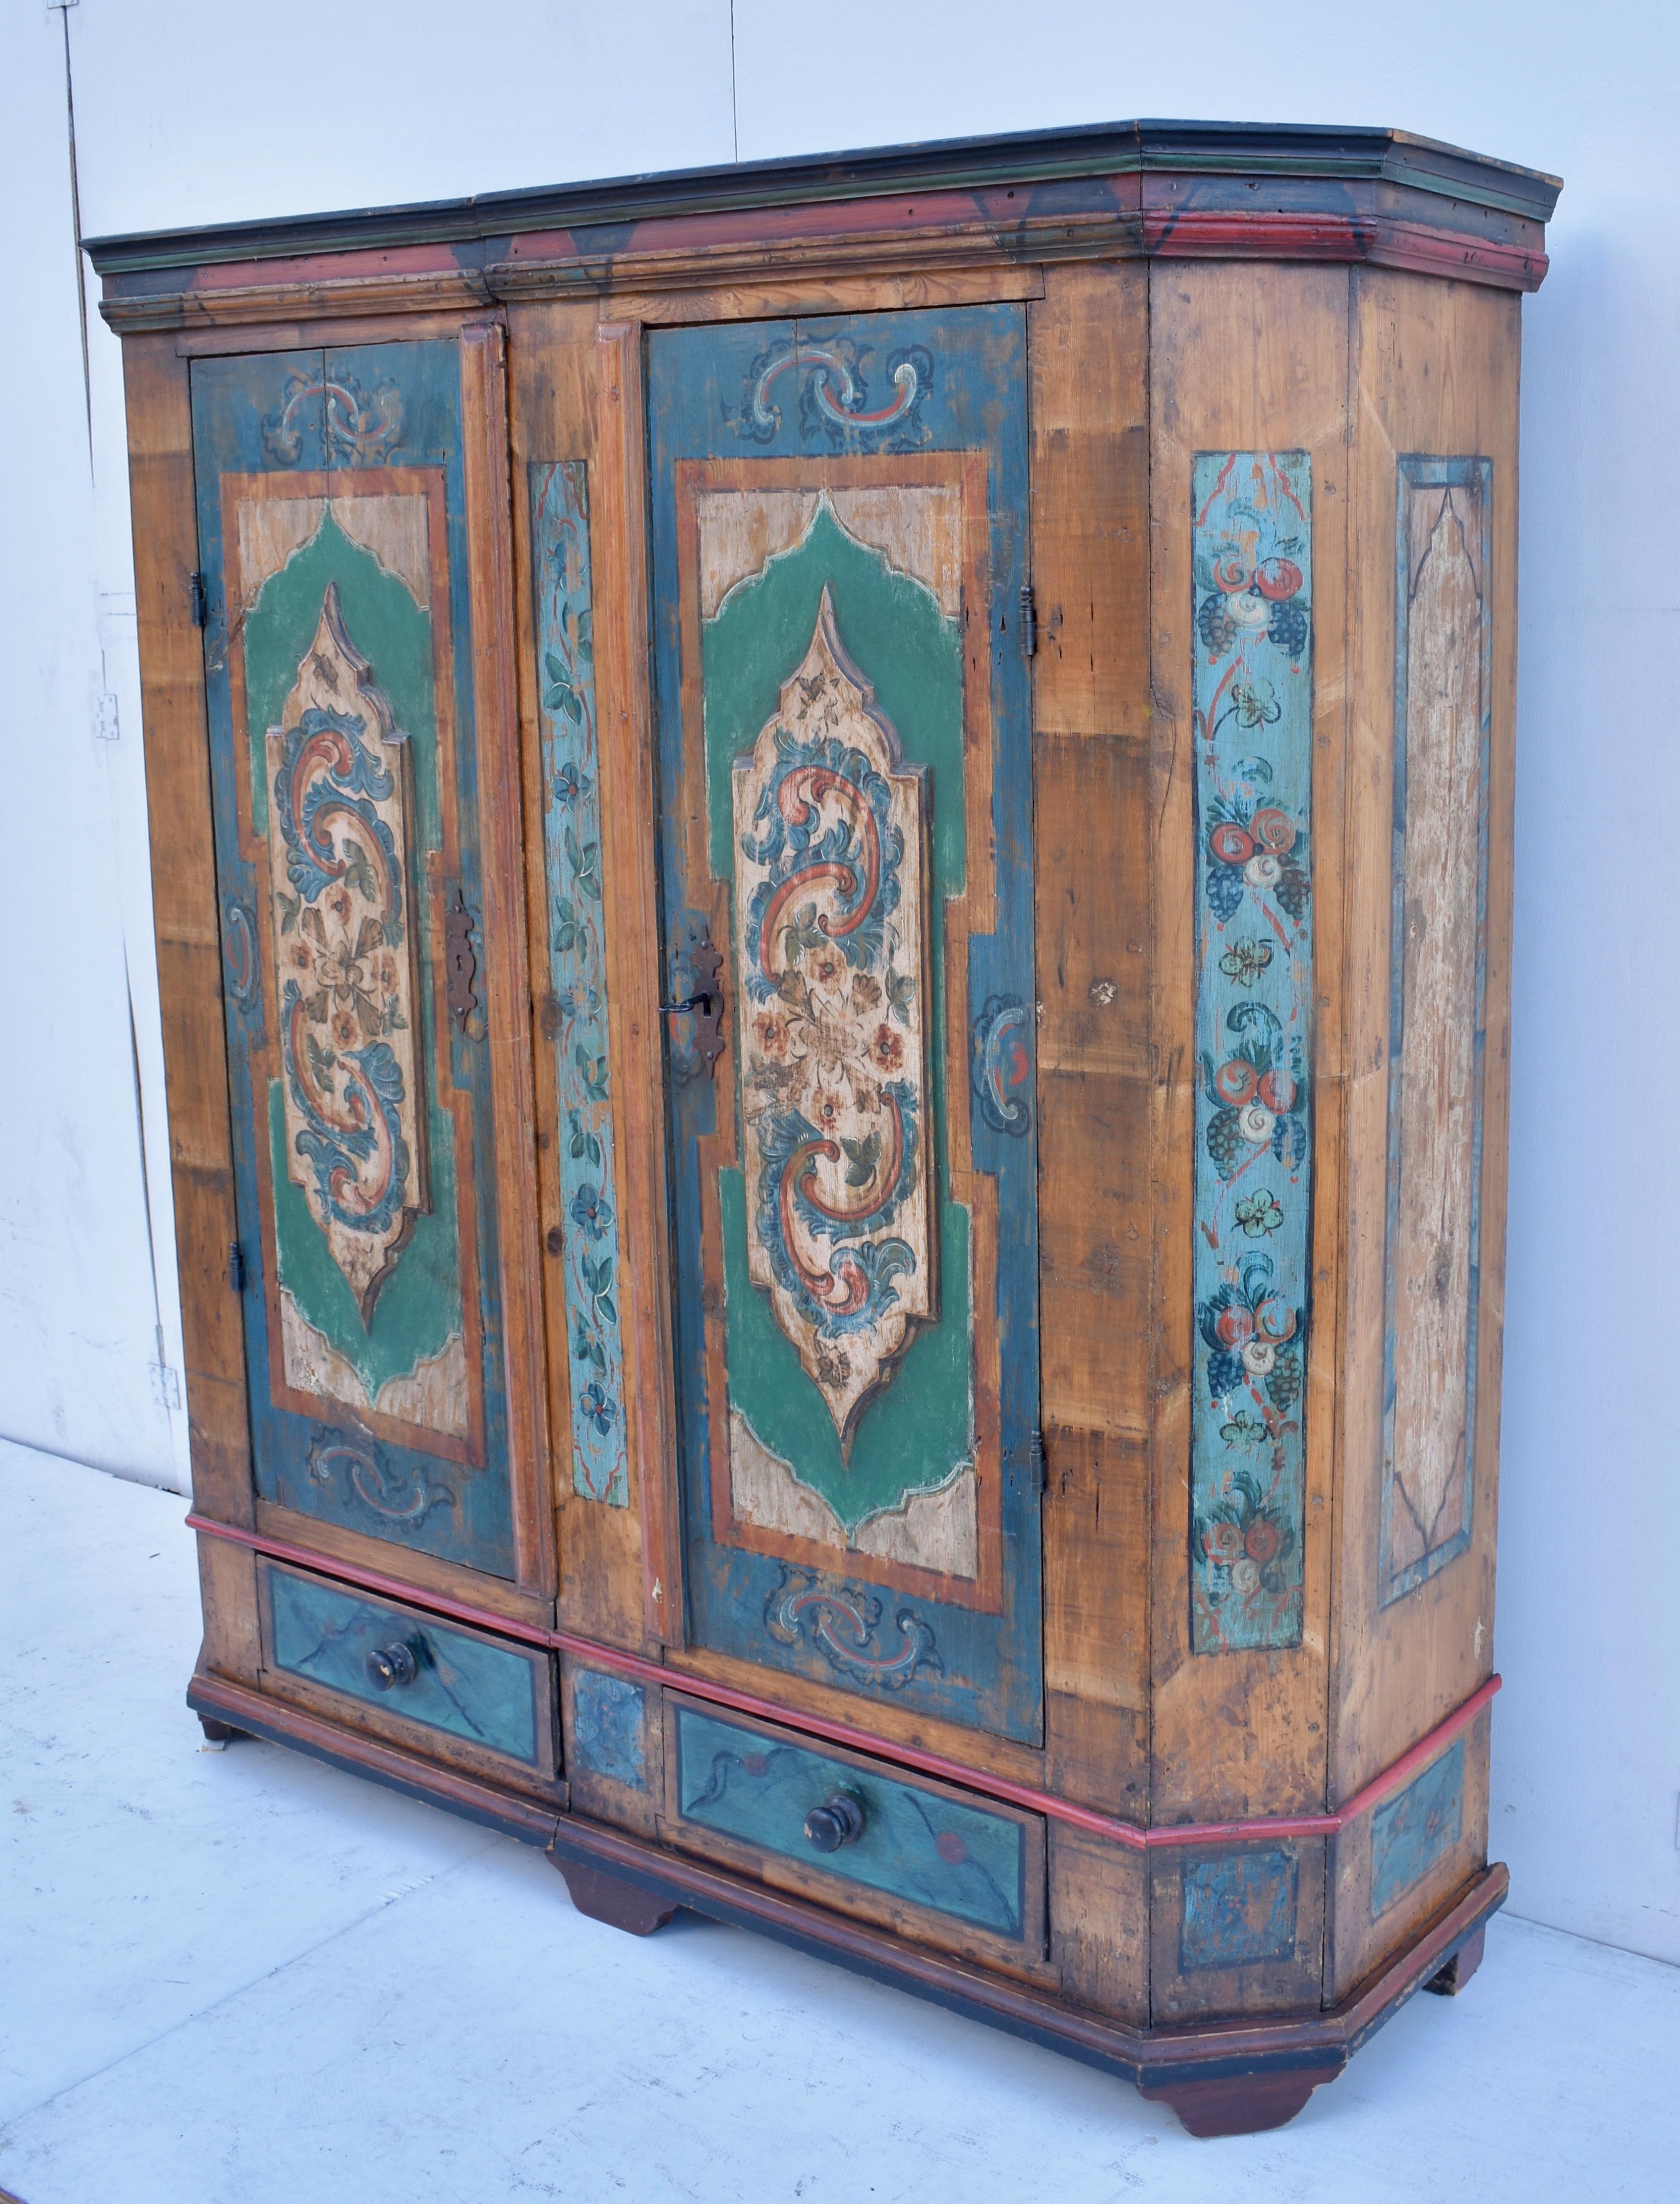 What an outstanding armoire! We first bought it in the eighties in the Netherlands. Our customer has recently down-sized and so we have the privilege of offering it for sale again. This is quite one of the most beautiful baroque armoires we have